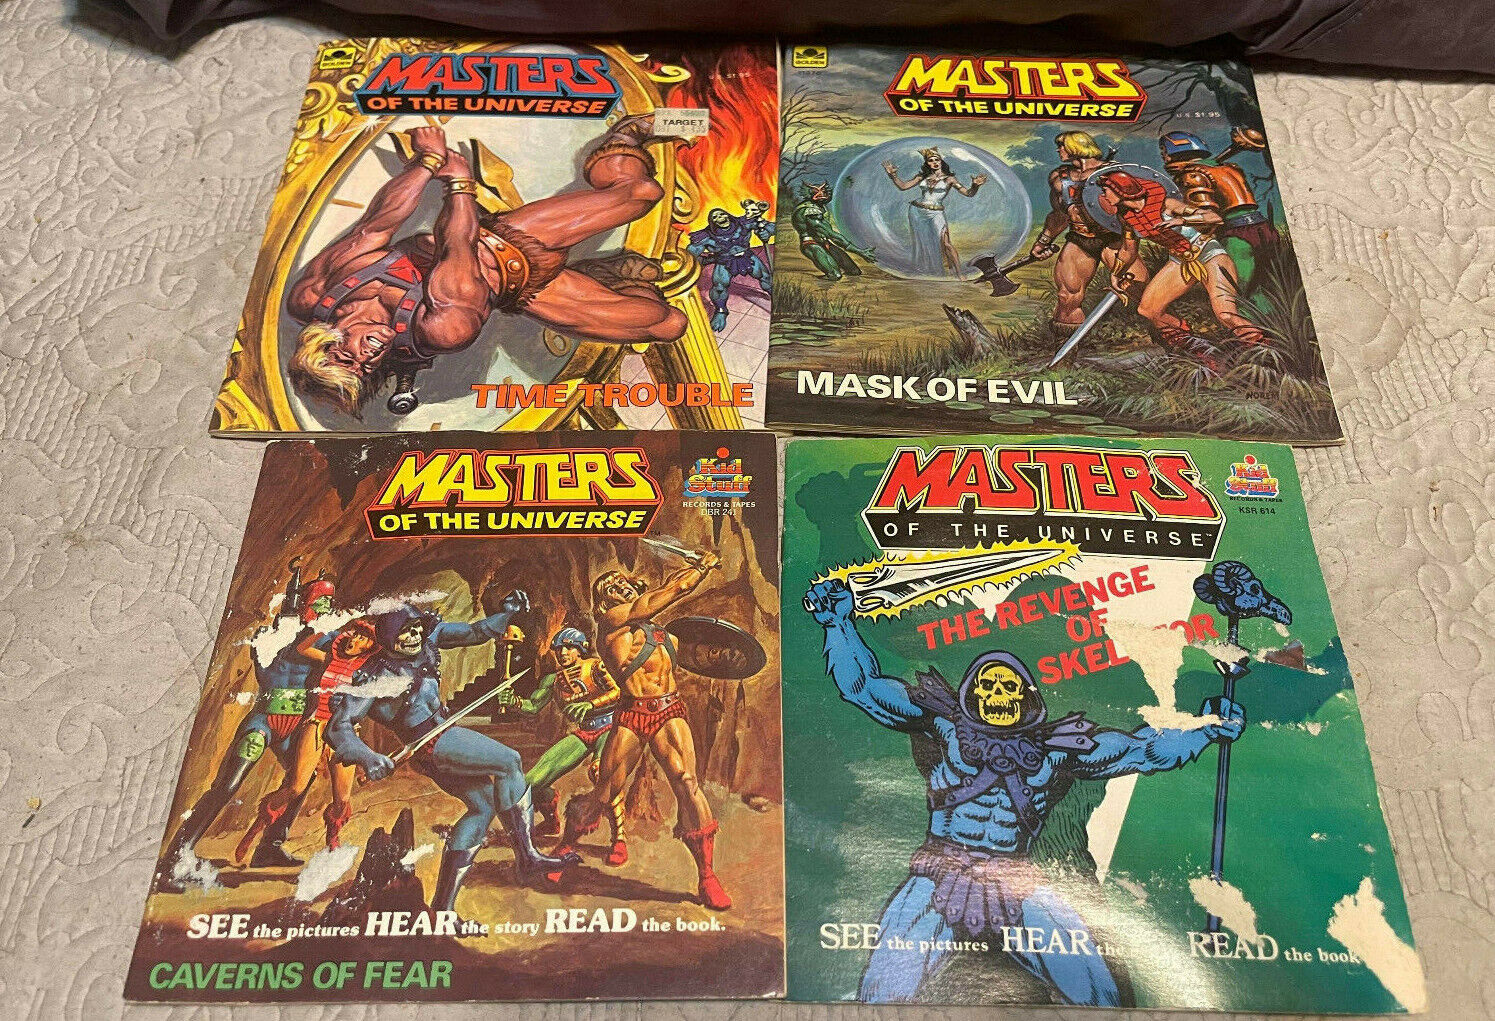 Masters of the Universe KIDS STUFF Vintage Book Lot MOTU - One with Record